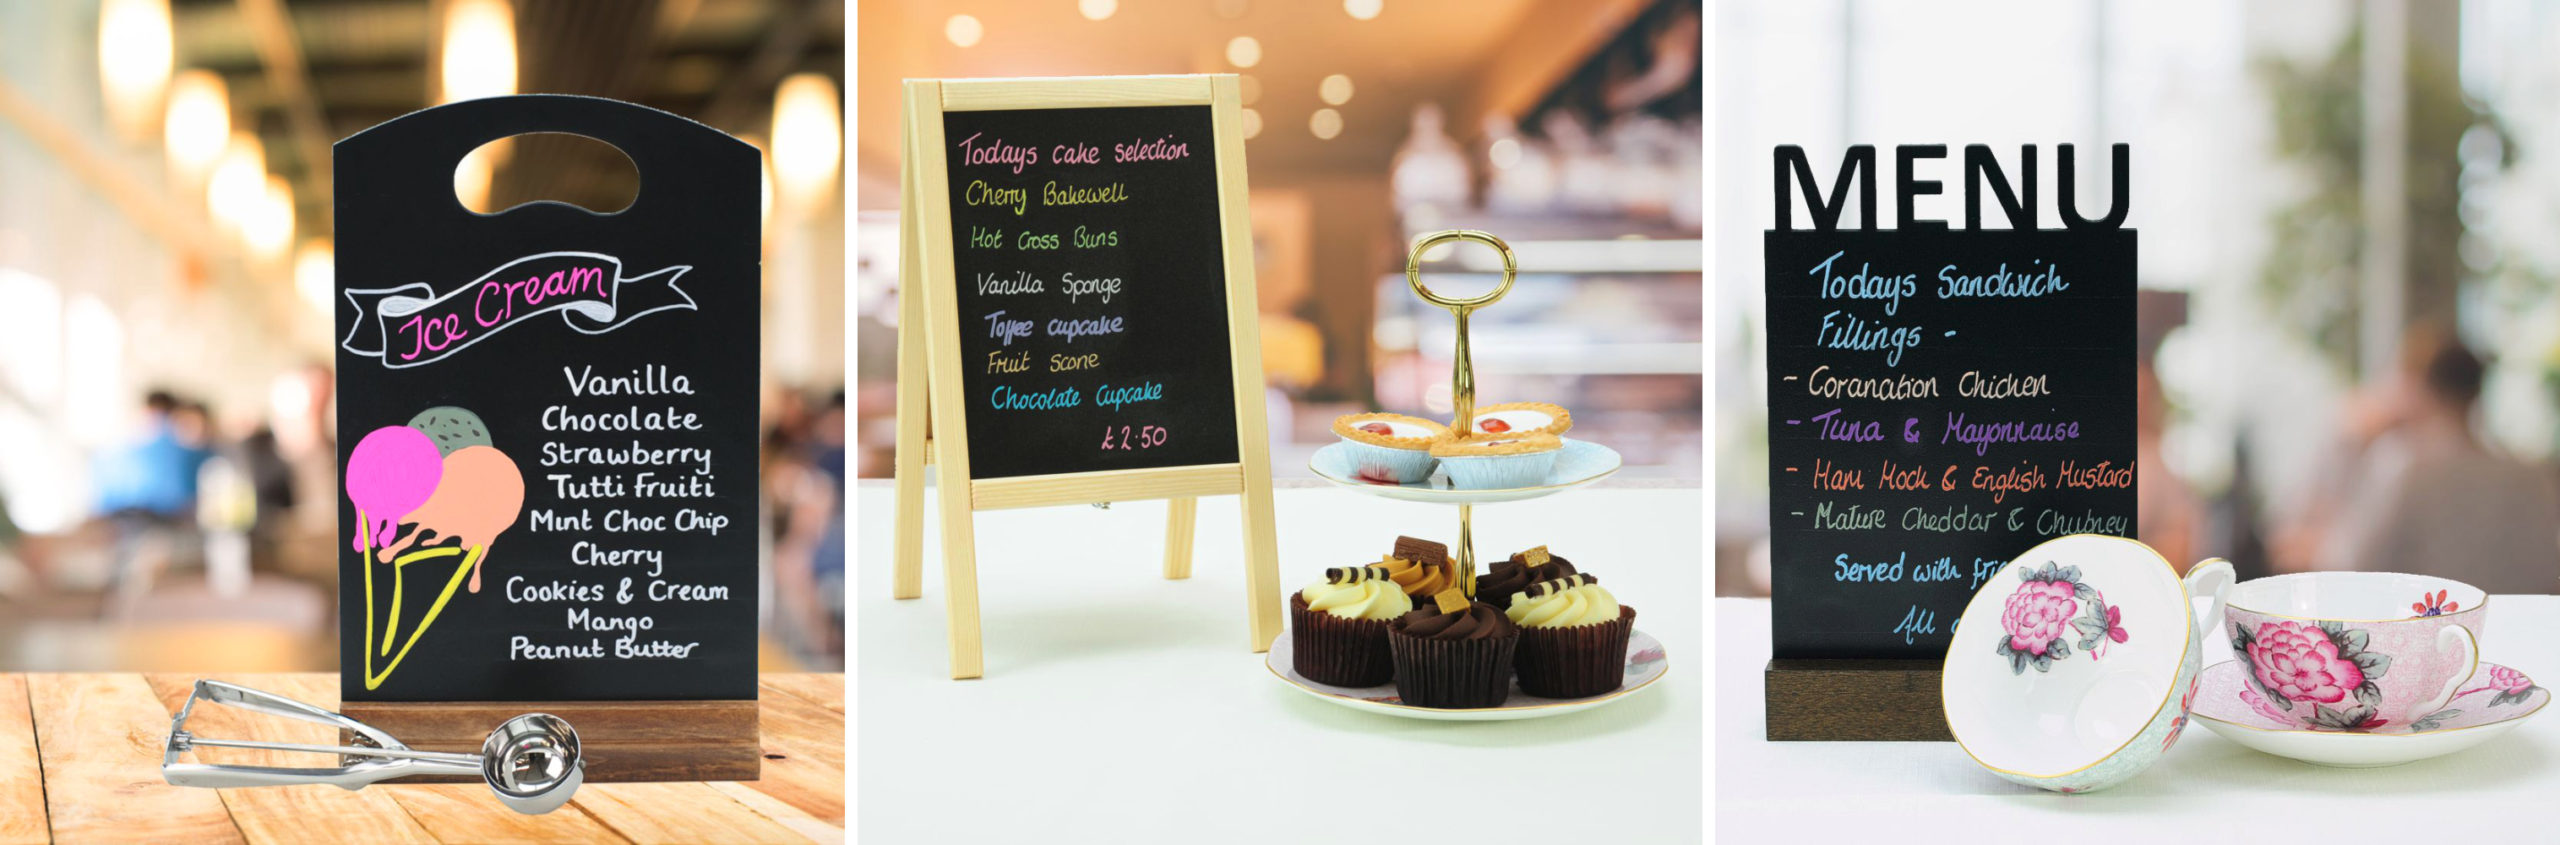 Tabletop chalkboards restaurants menus special offers prices writing 